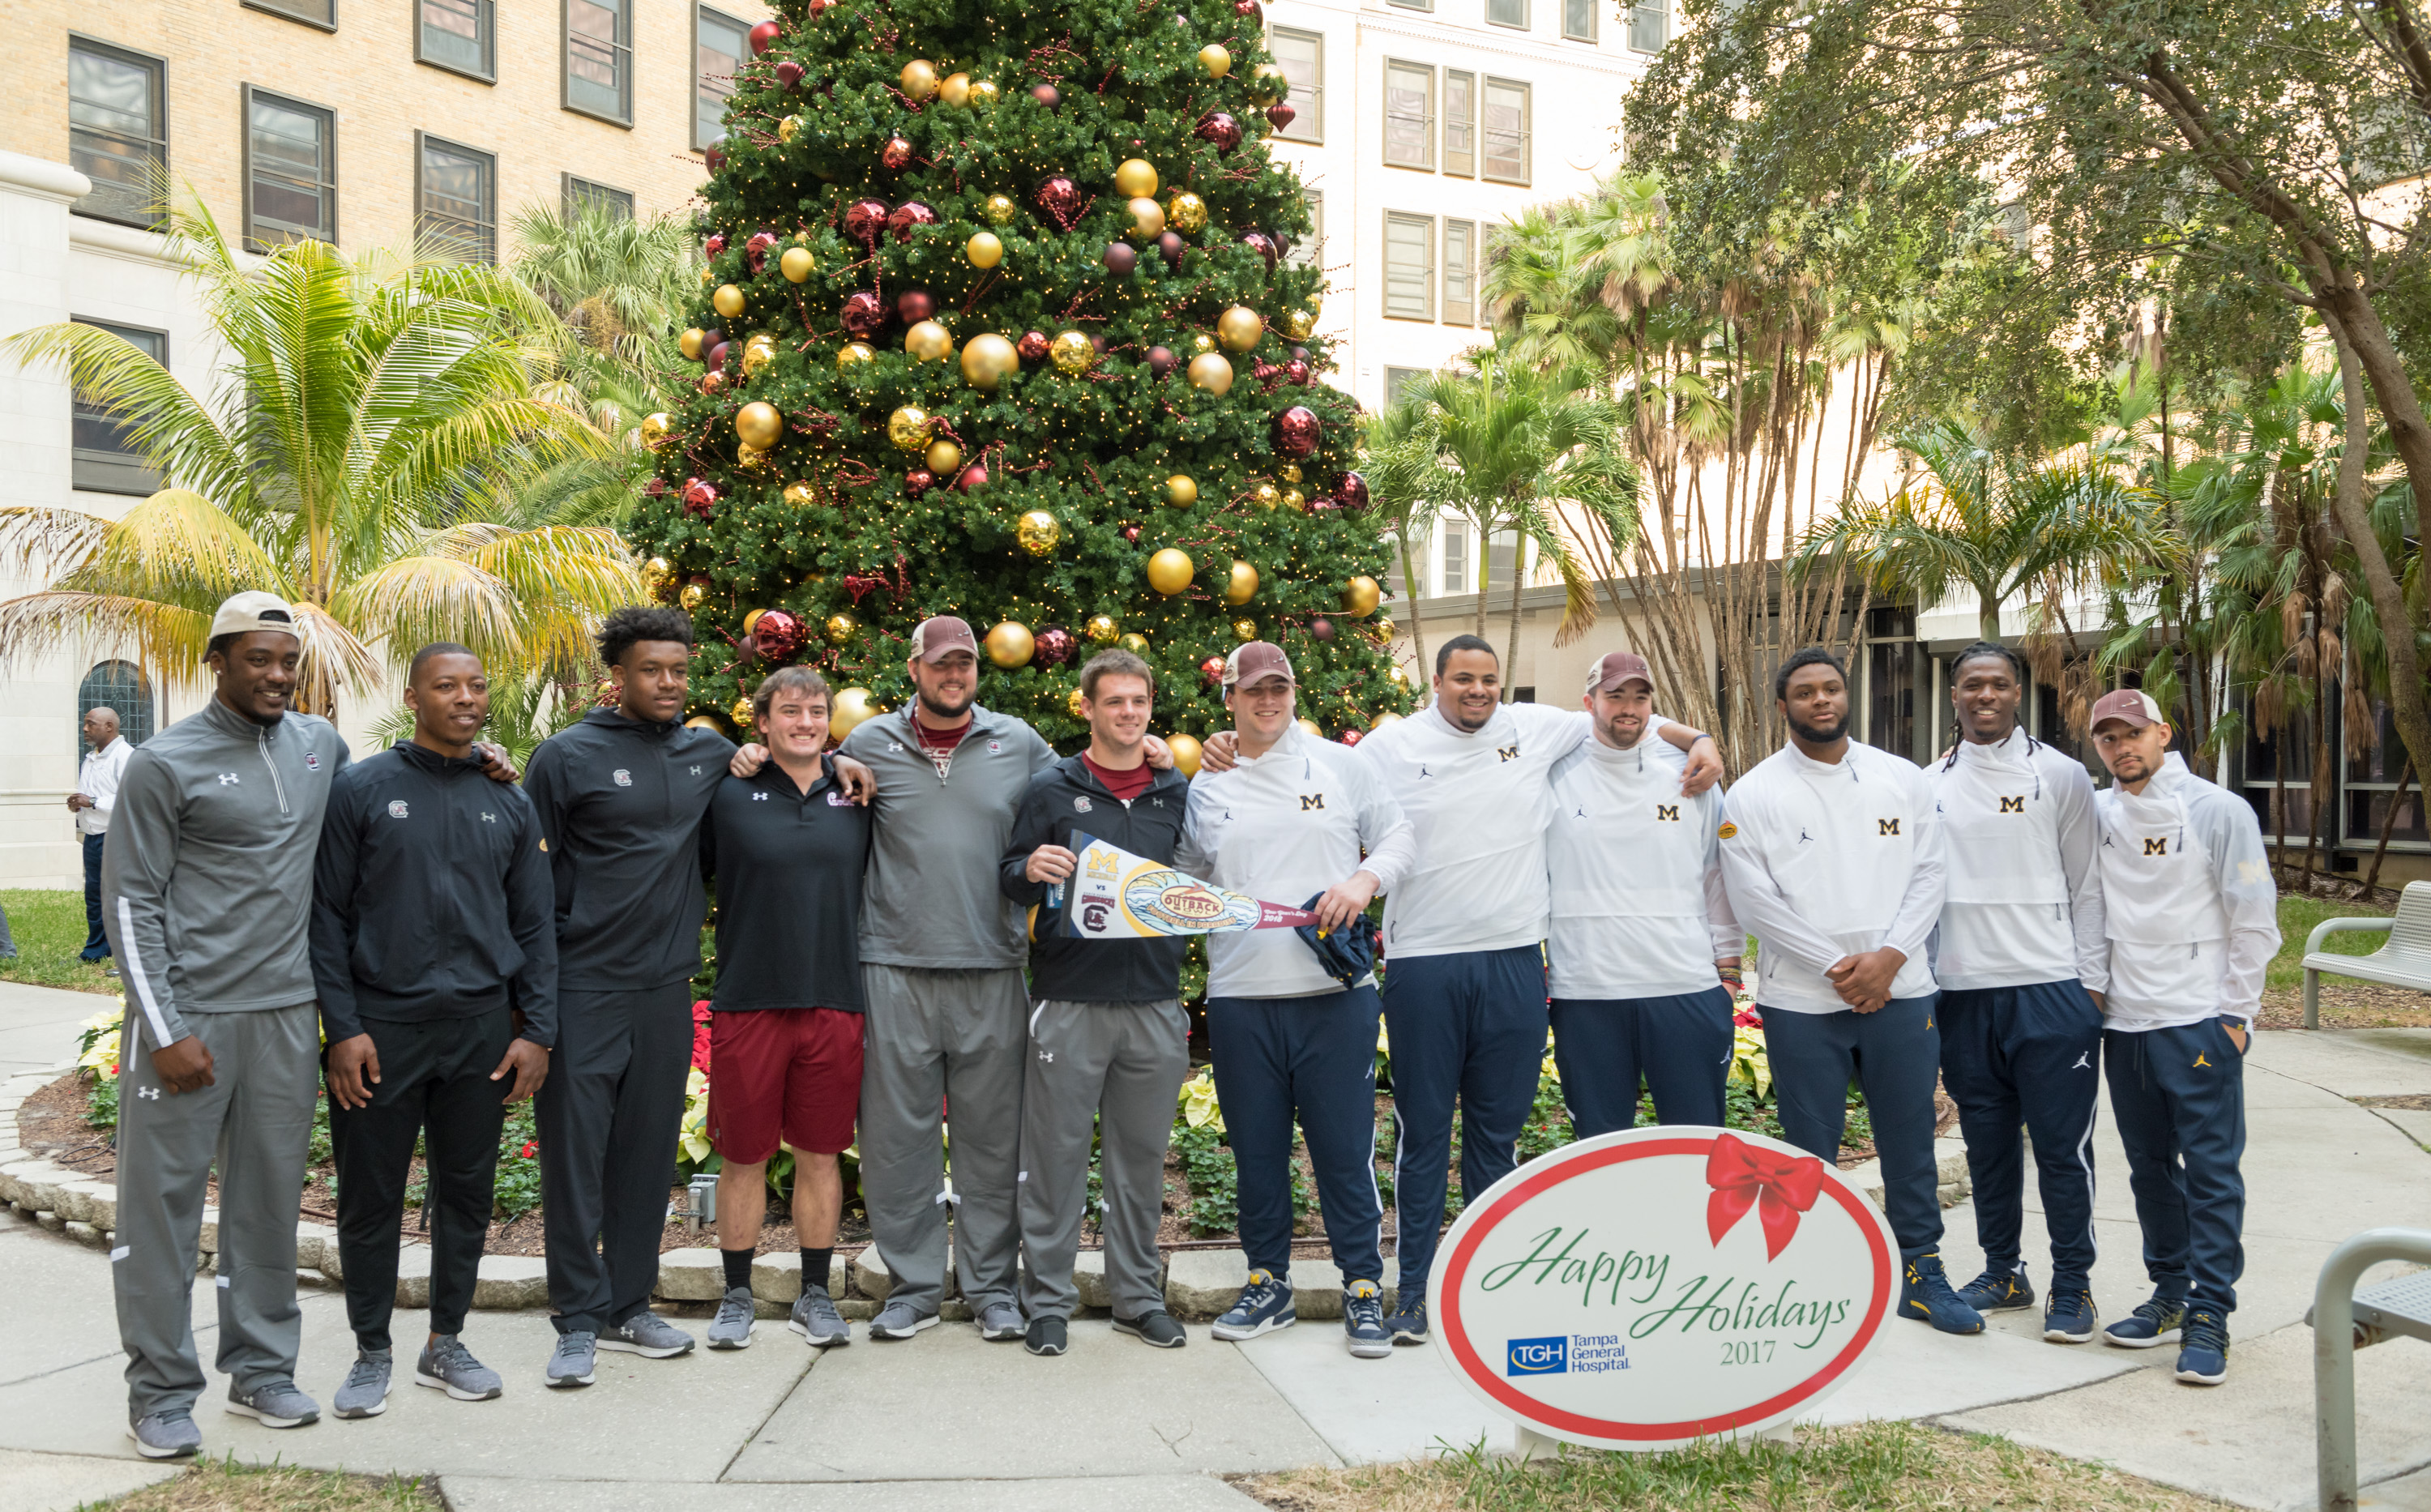 Outback bowl players in front of the Christmas tree